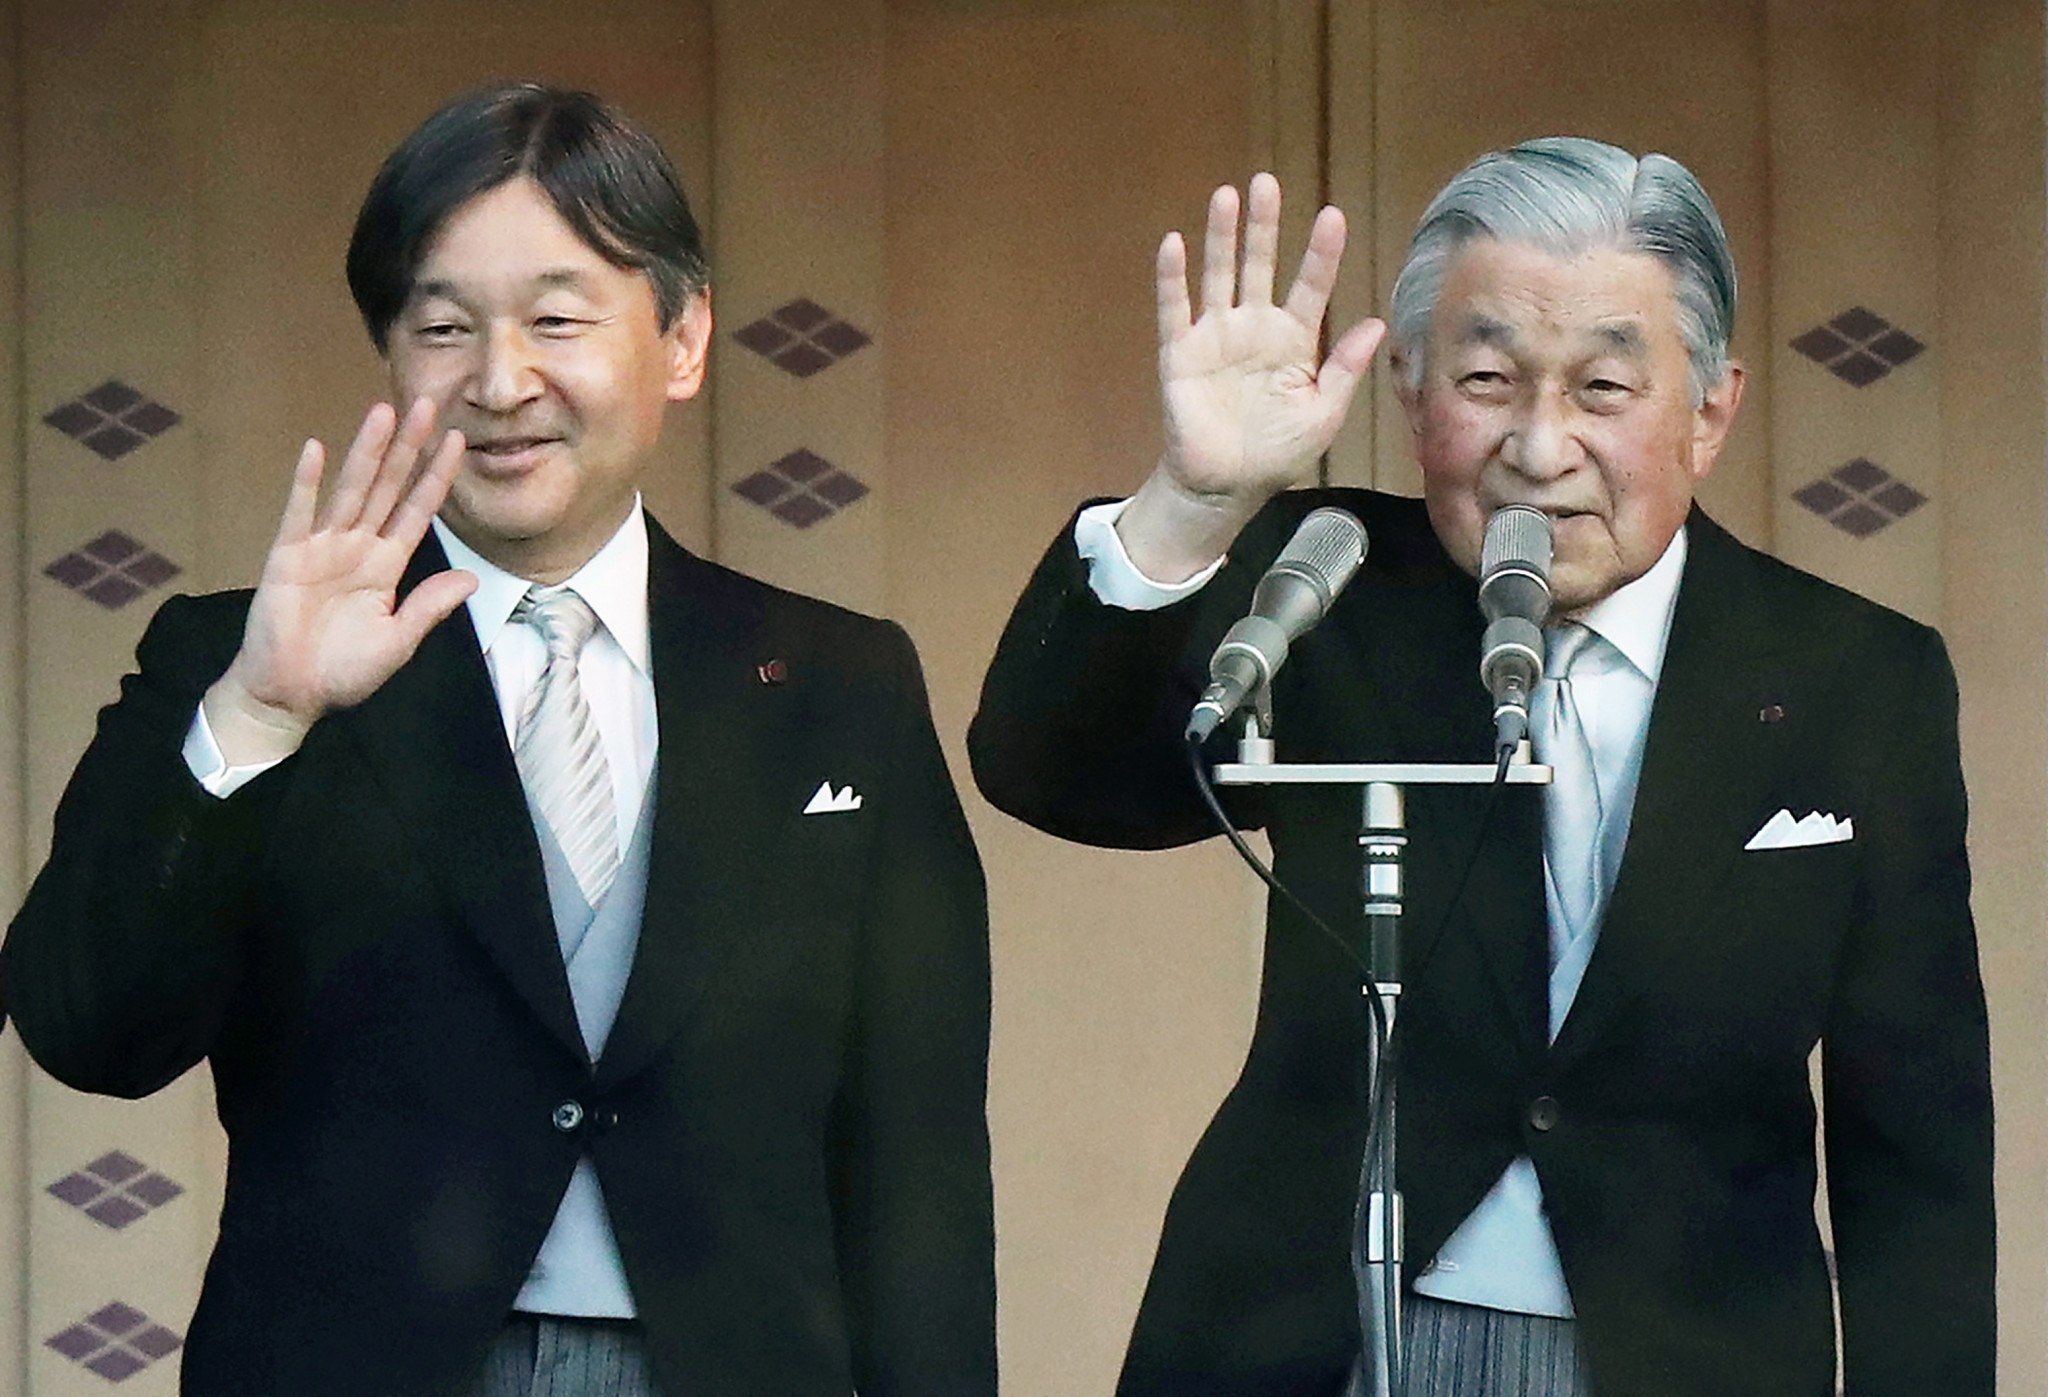 Crown Prince Naruhito will succeed Emperor Akihito on May 1 ©Getty Images